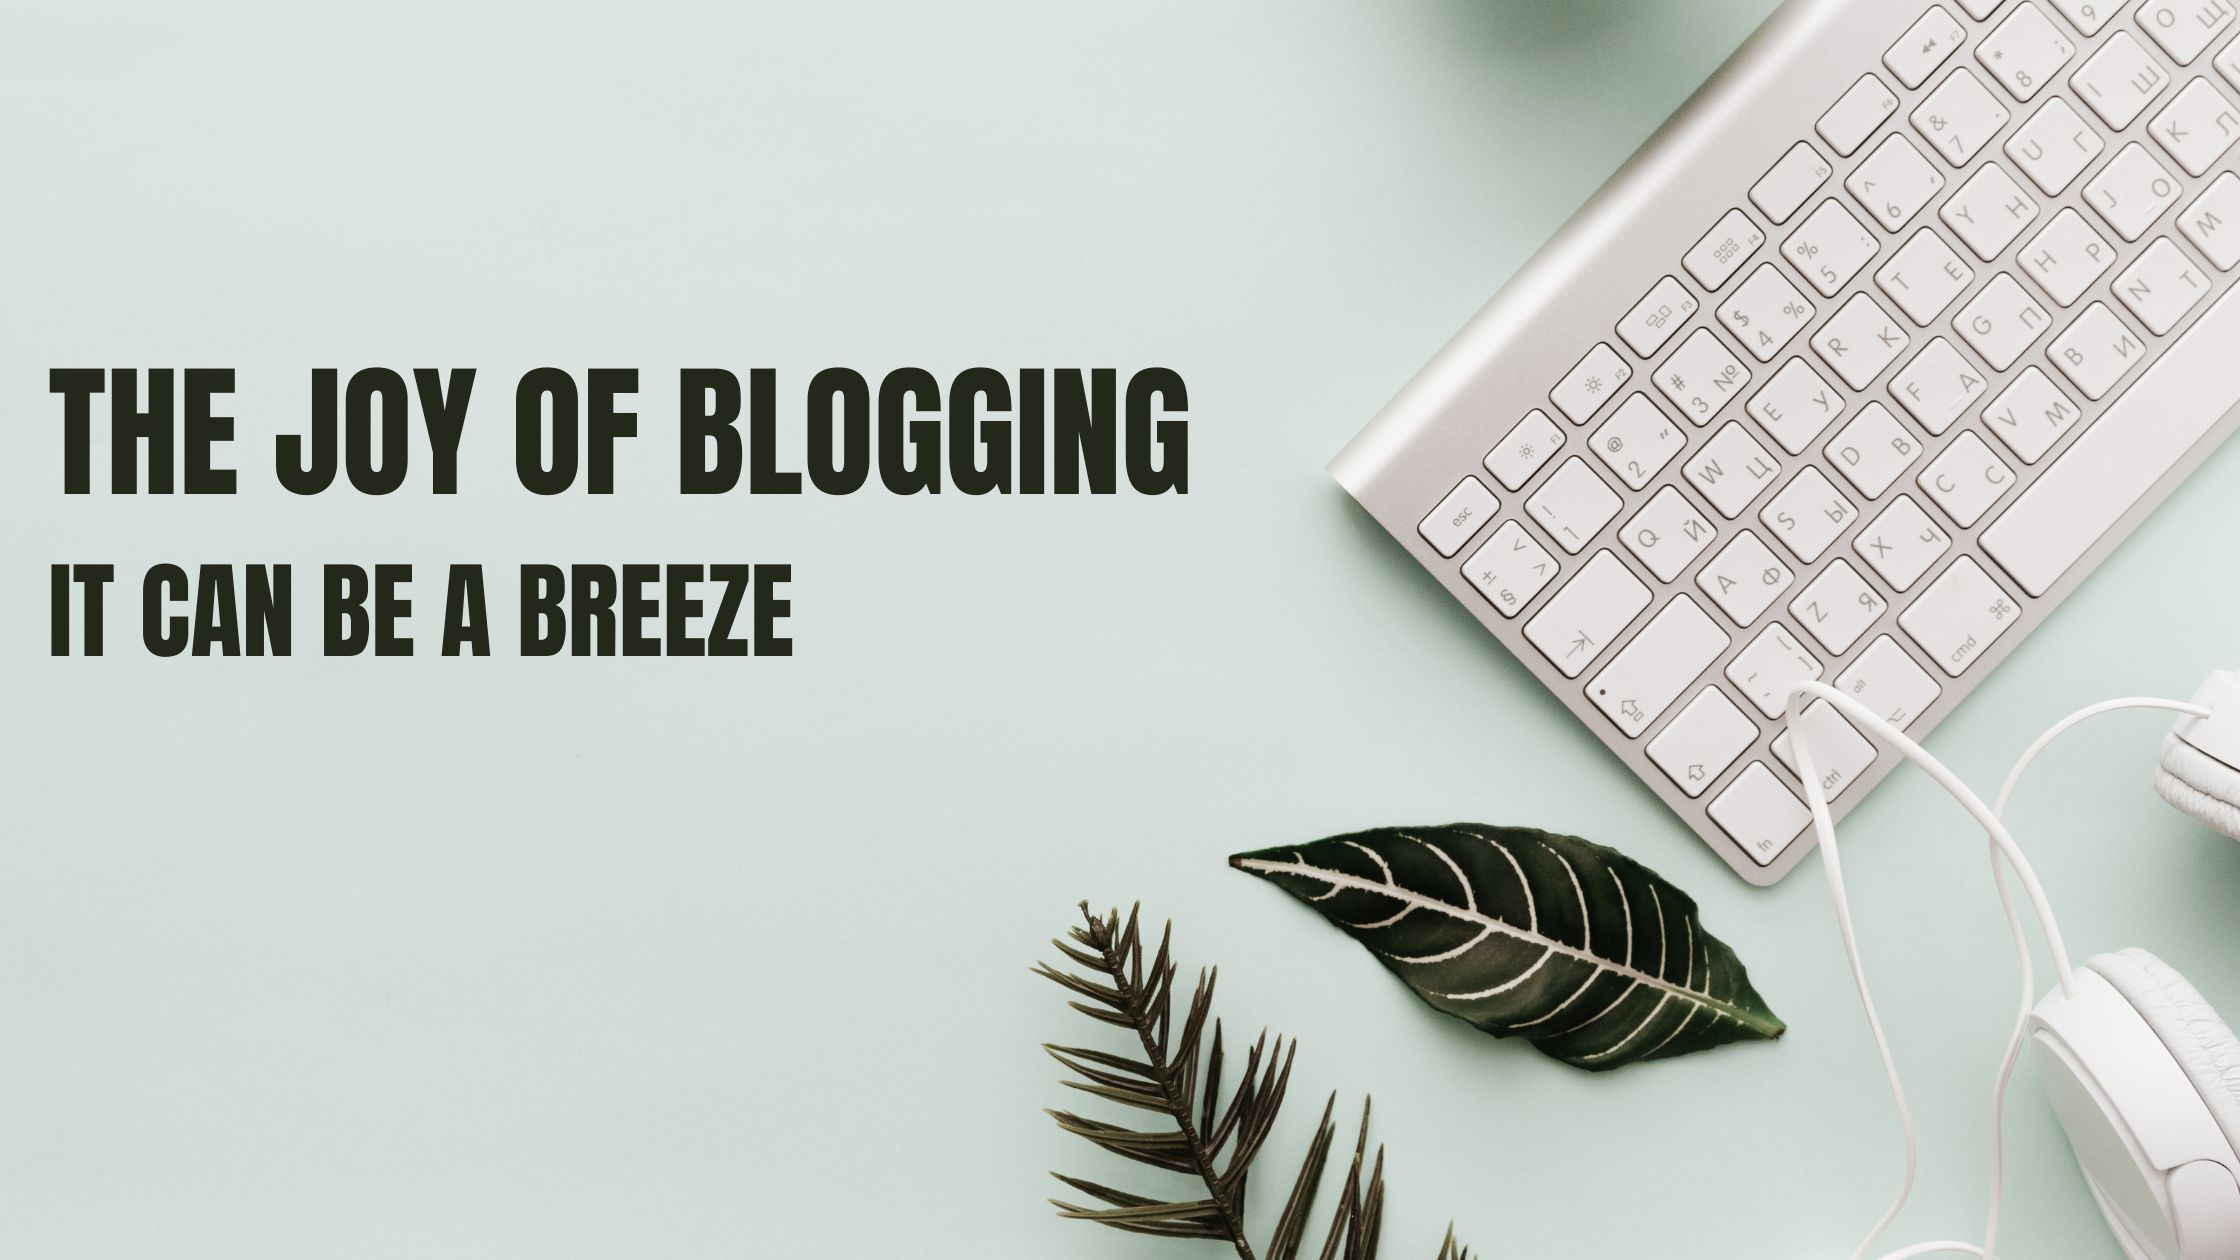 The joy of blogging: It can be a breeze